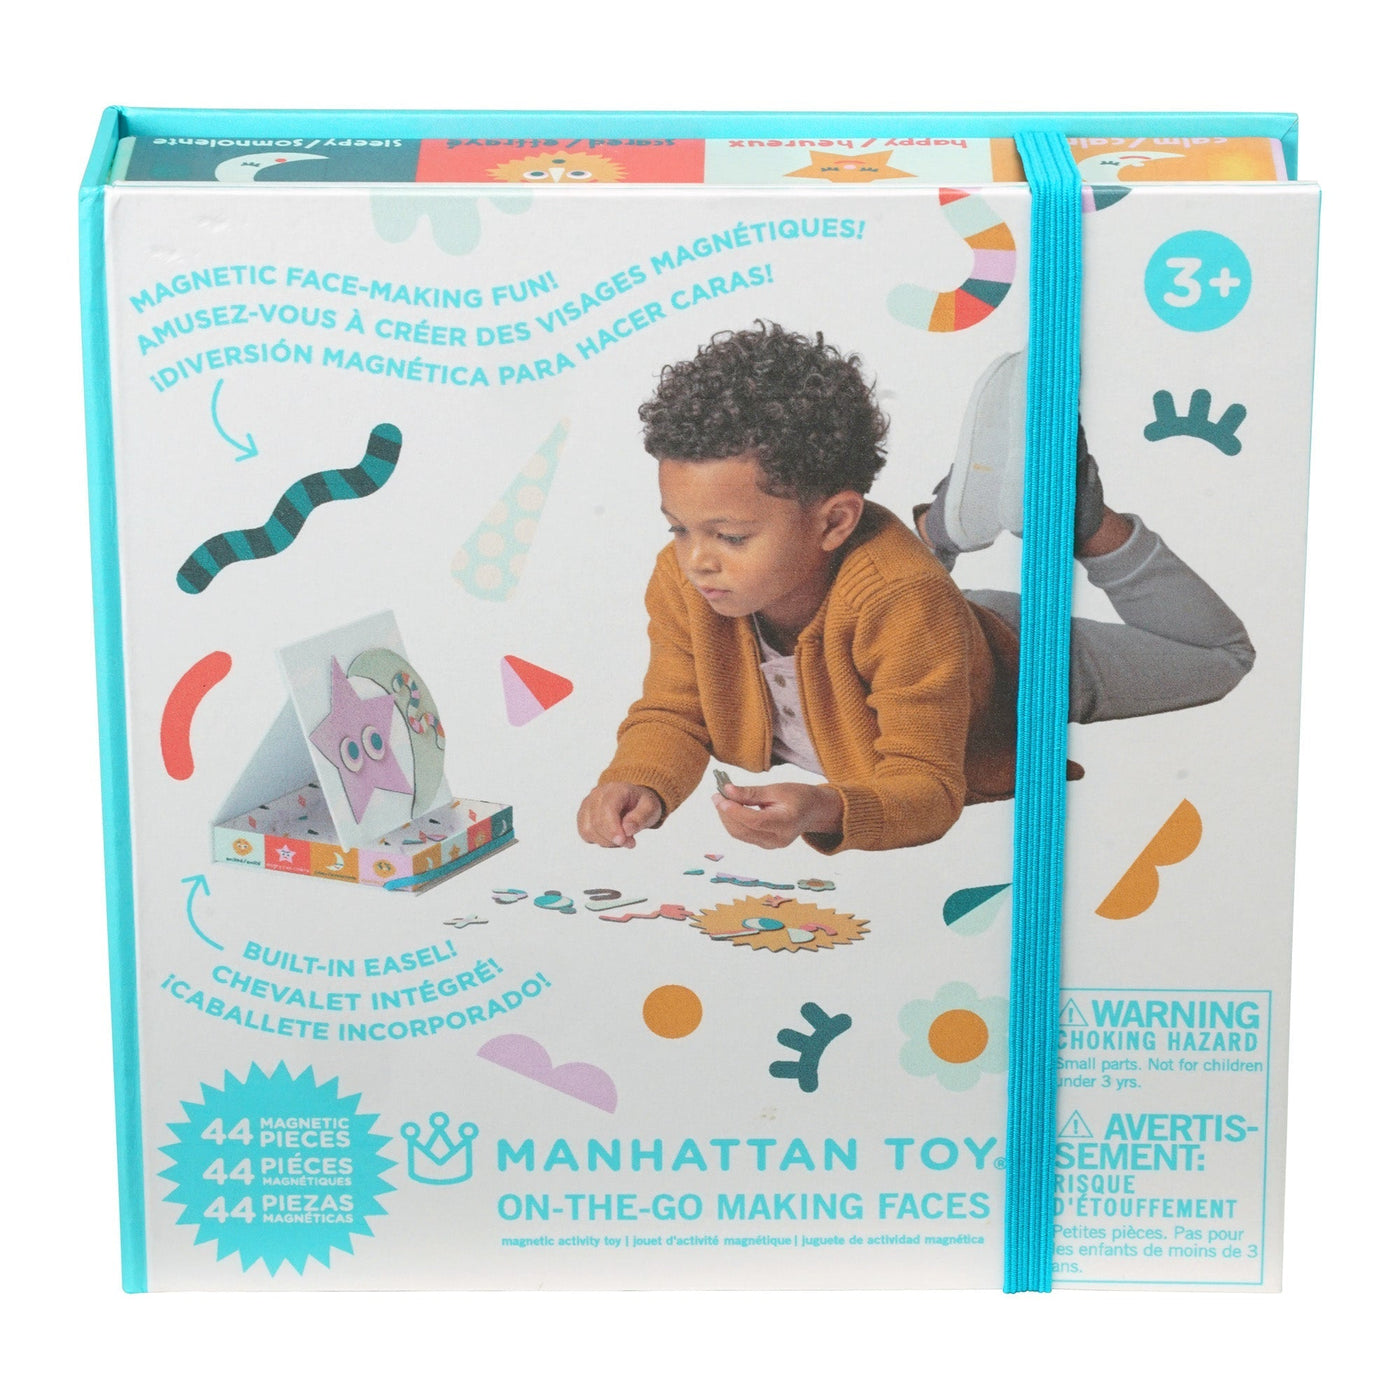 On-The-Go Making Faces by Manhattan Toy